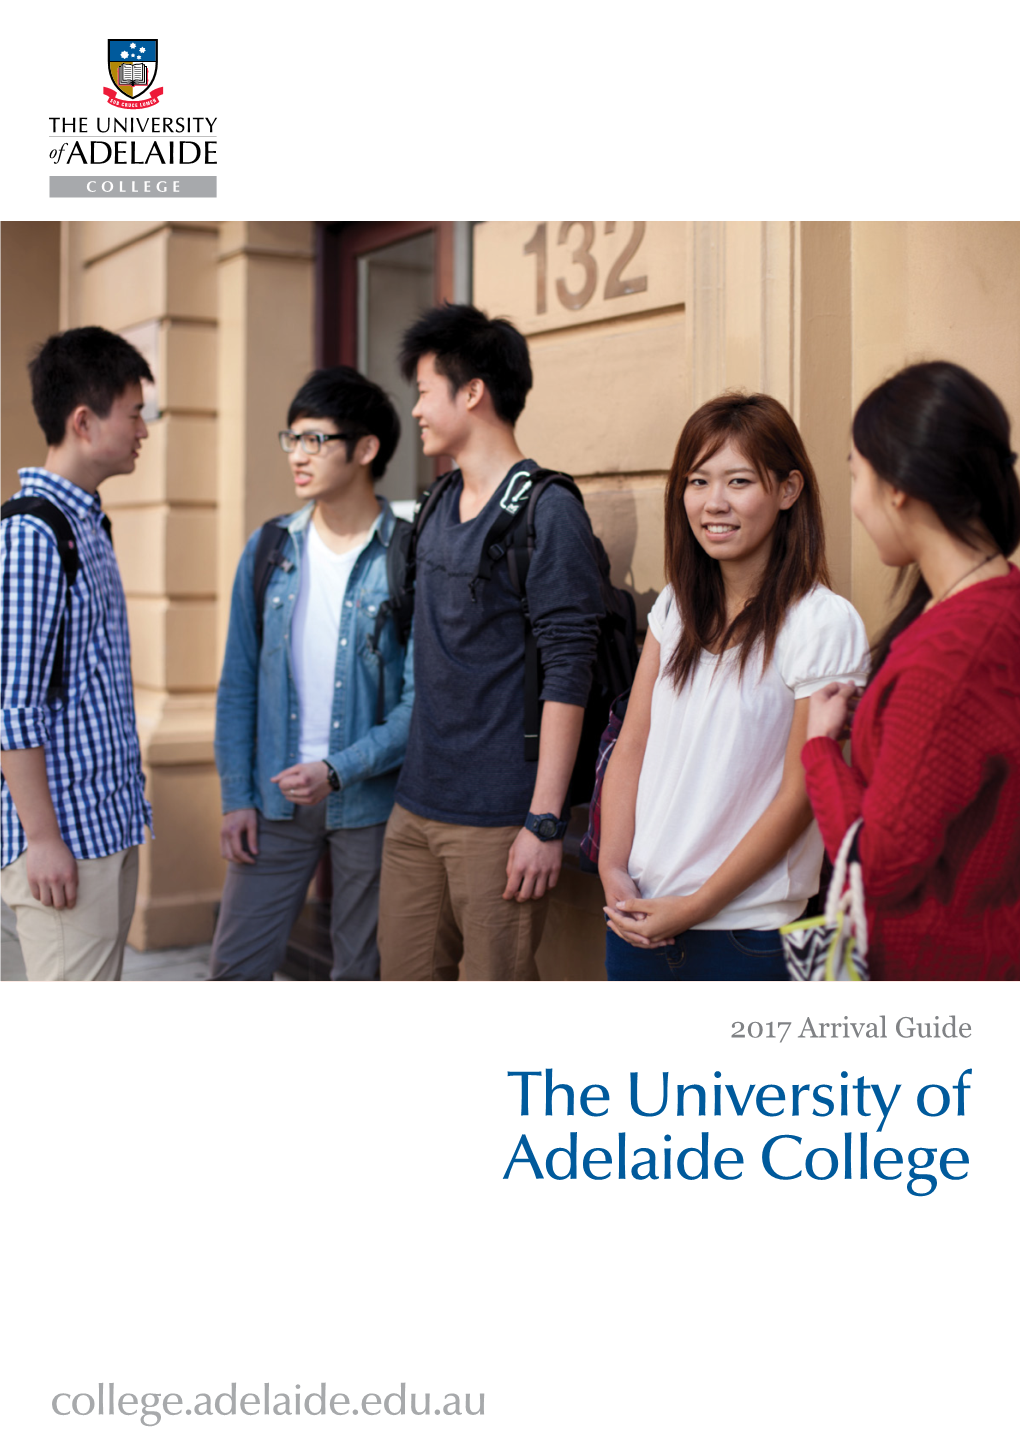 The University of Adelaide College